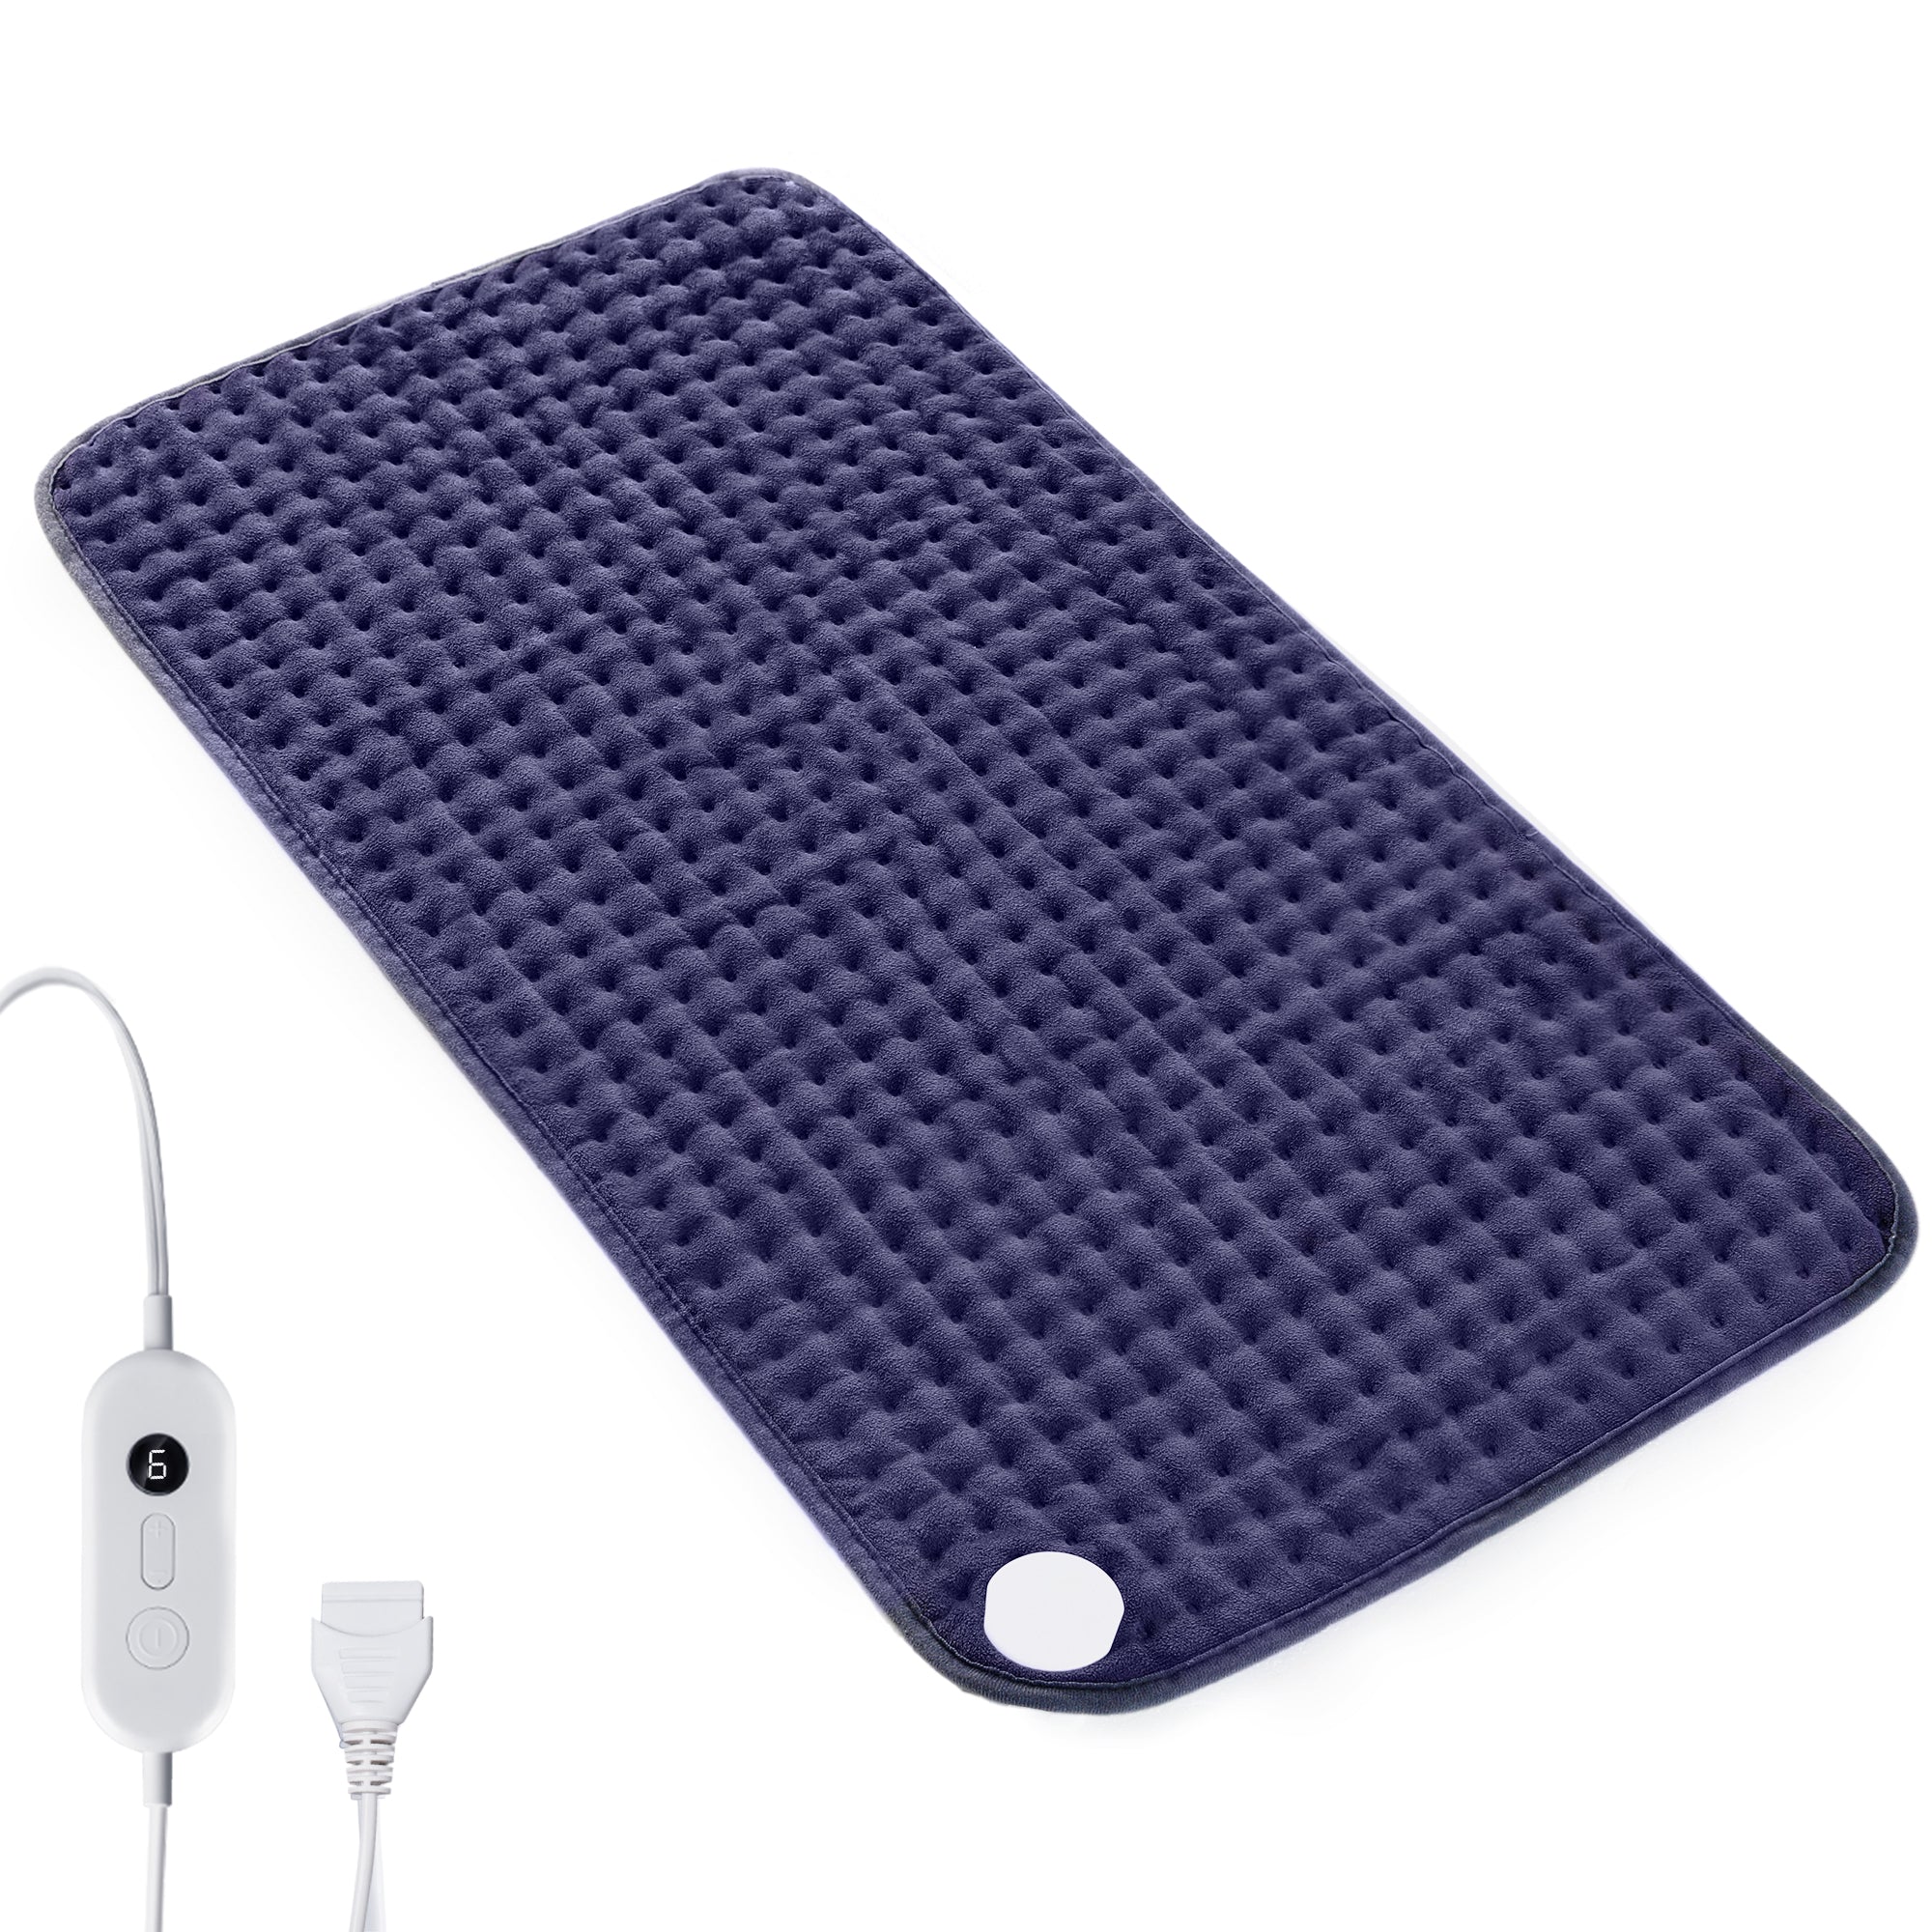 【33"x17"】Electric Heating Pad for Back Pain Cramps Relief, XXX-Large Ultra Soft Fast Heating